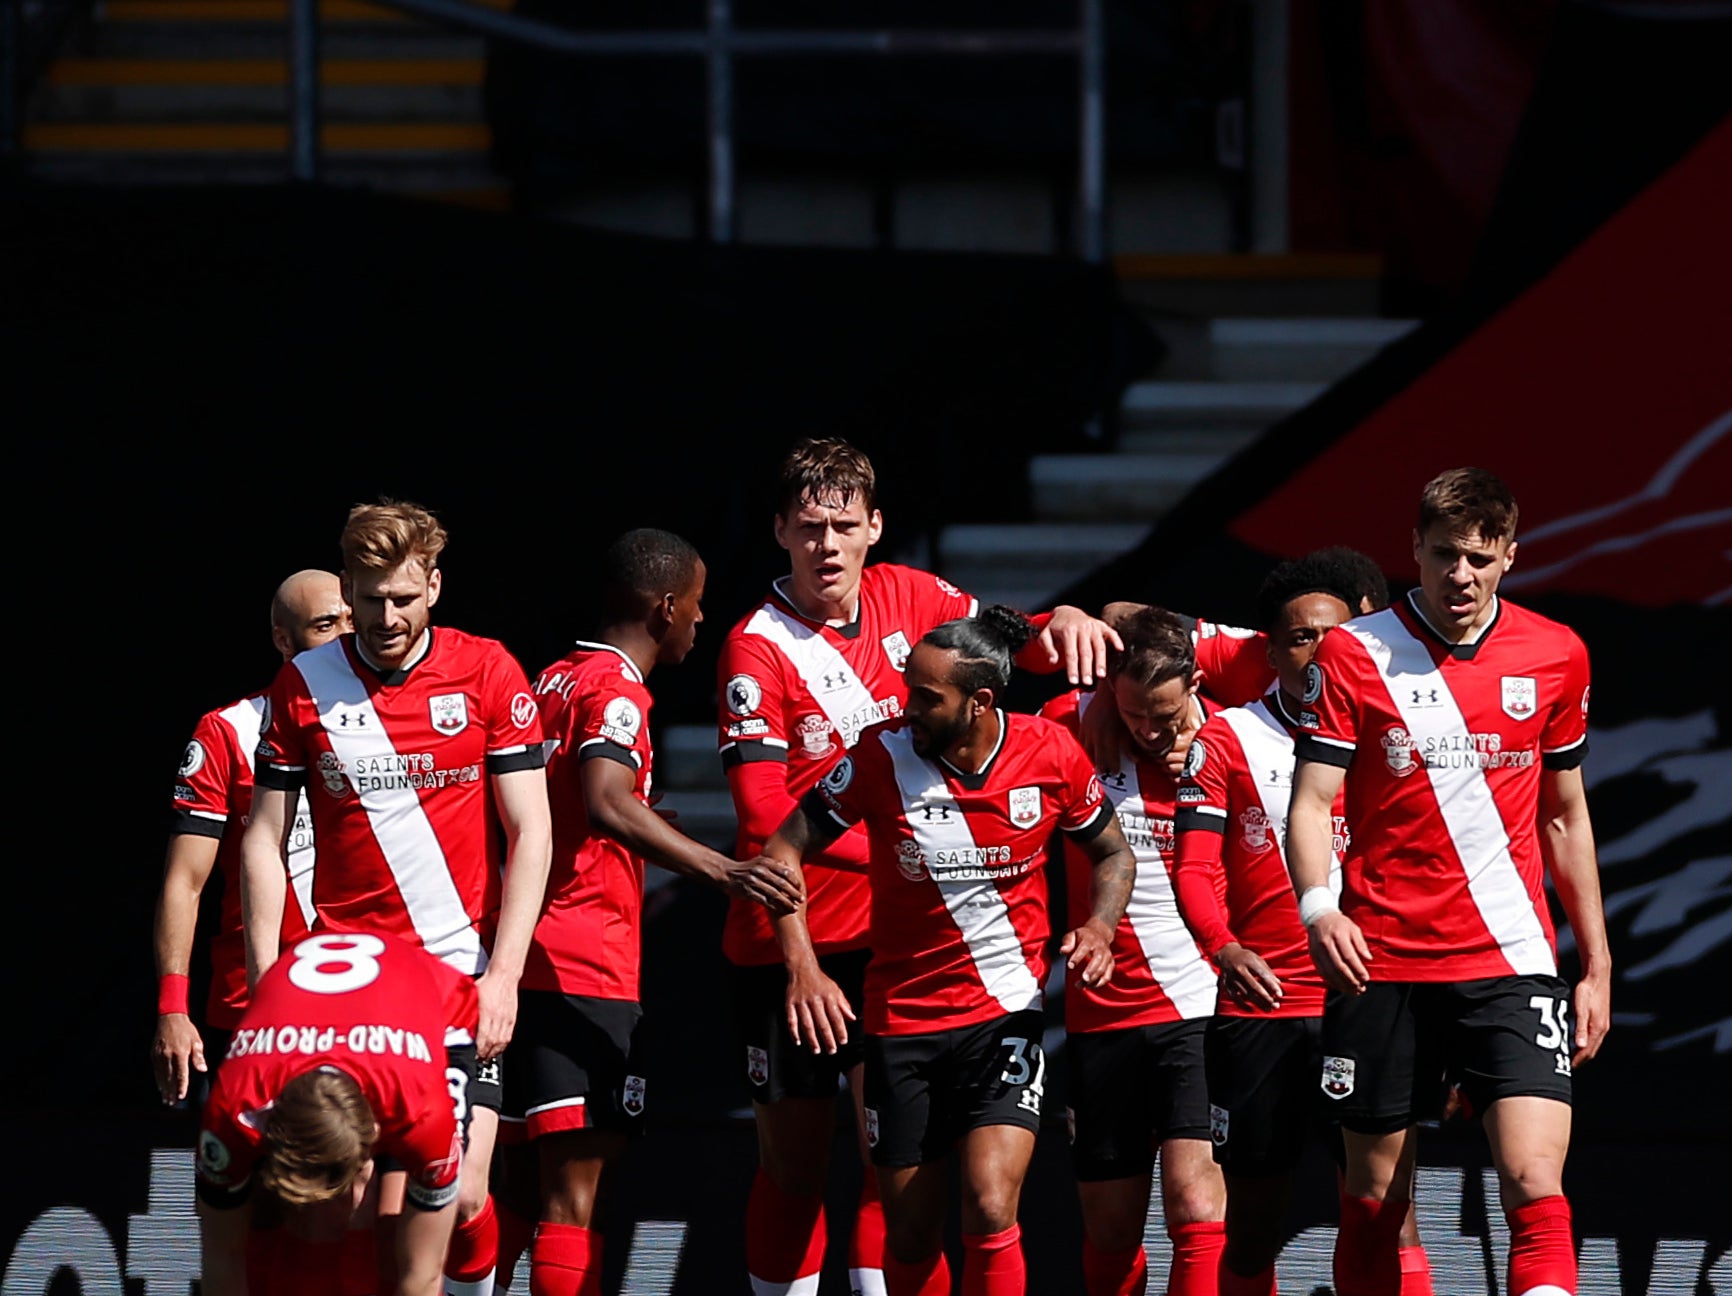 Southampton players celebrate during their match against Burnley